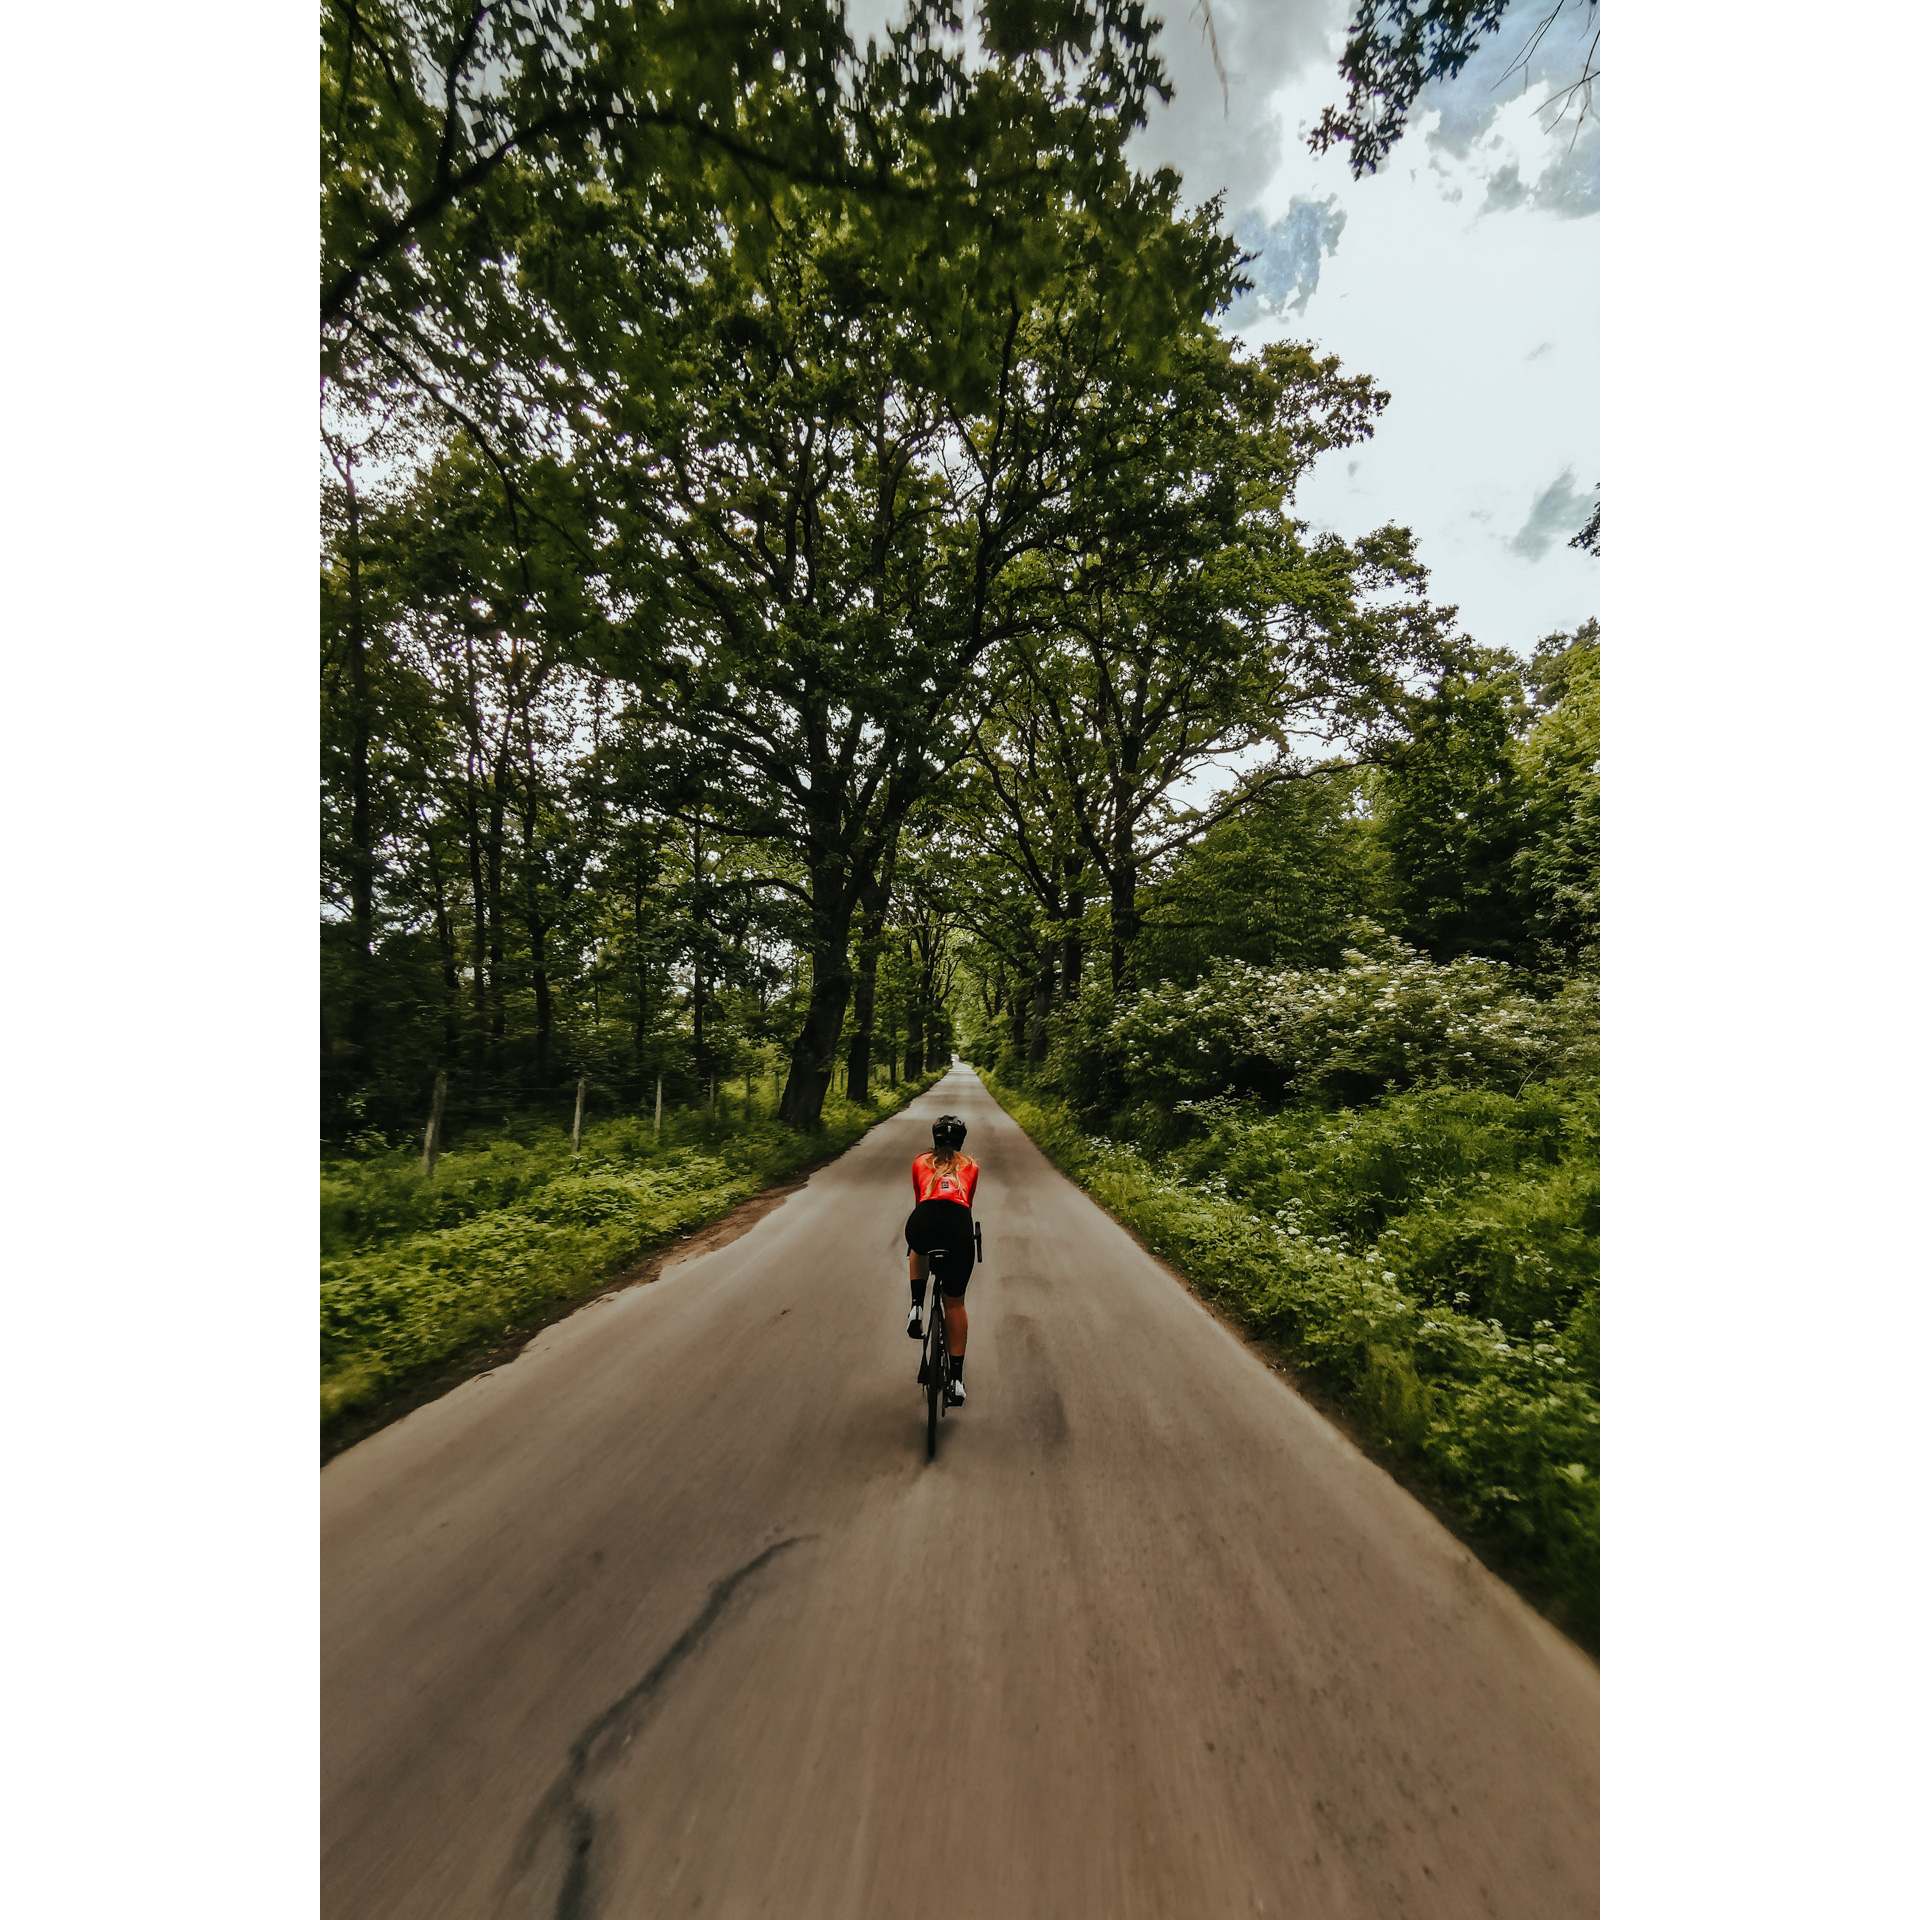 A cyclist in a red and black outfit riding an asphalt road surrounded by lush vegetation and trees with green leaves